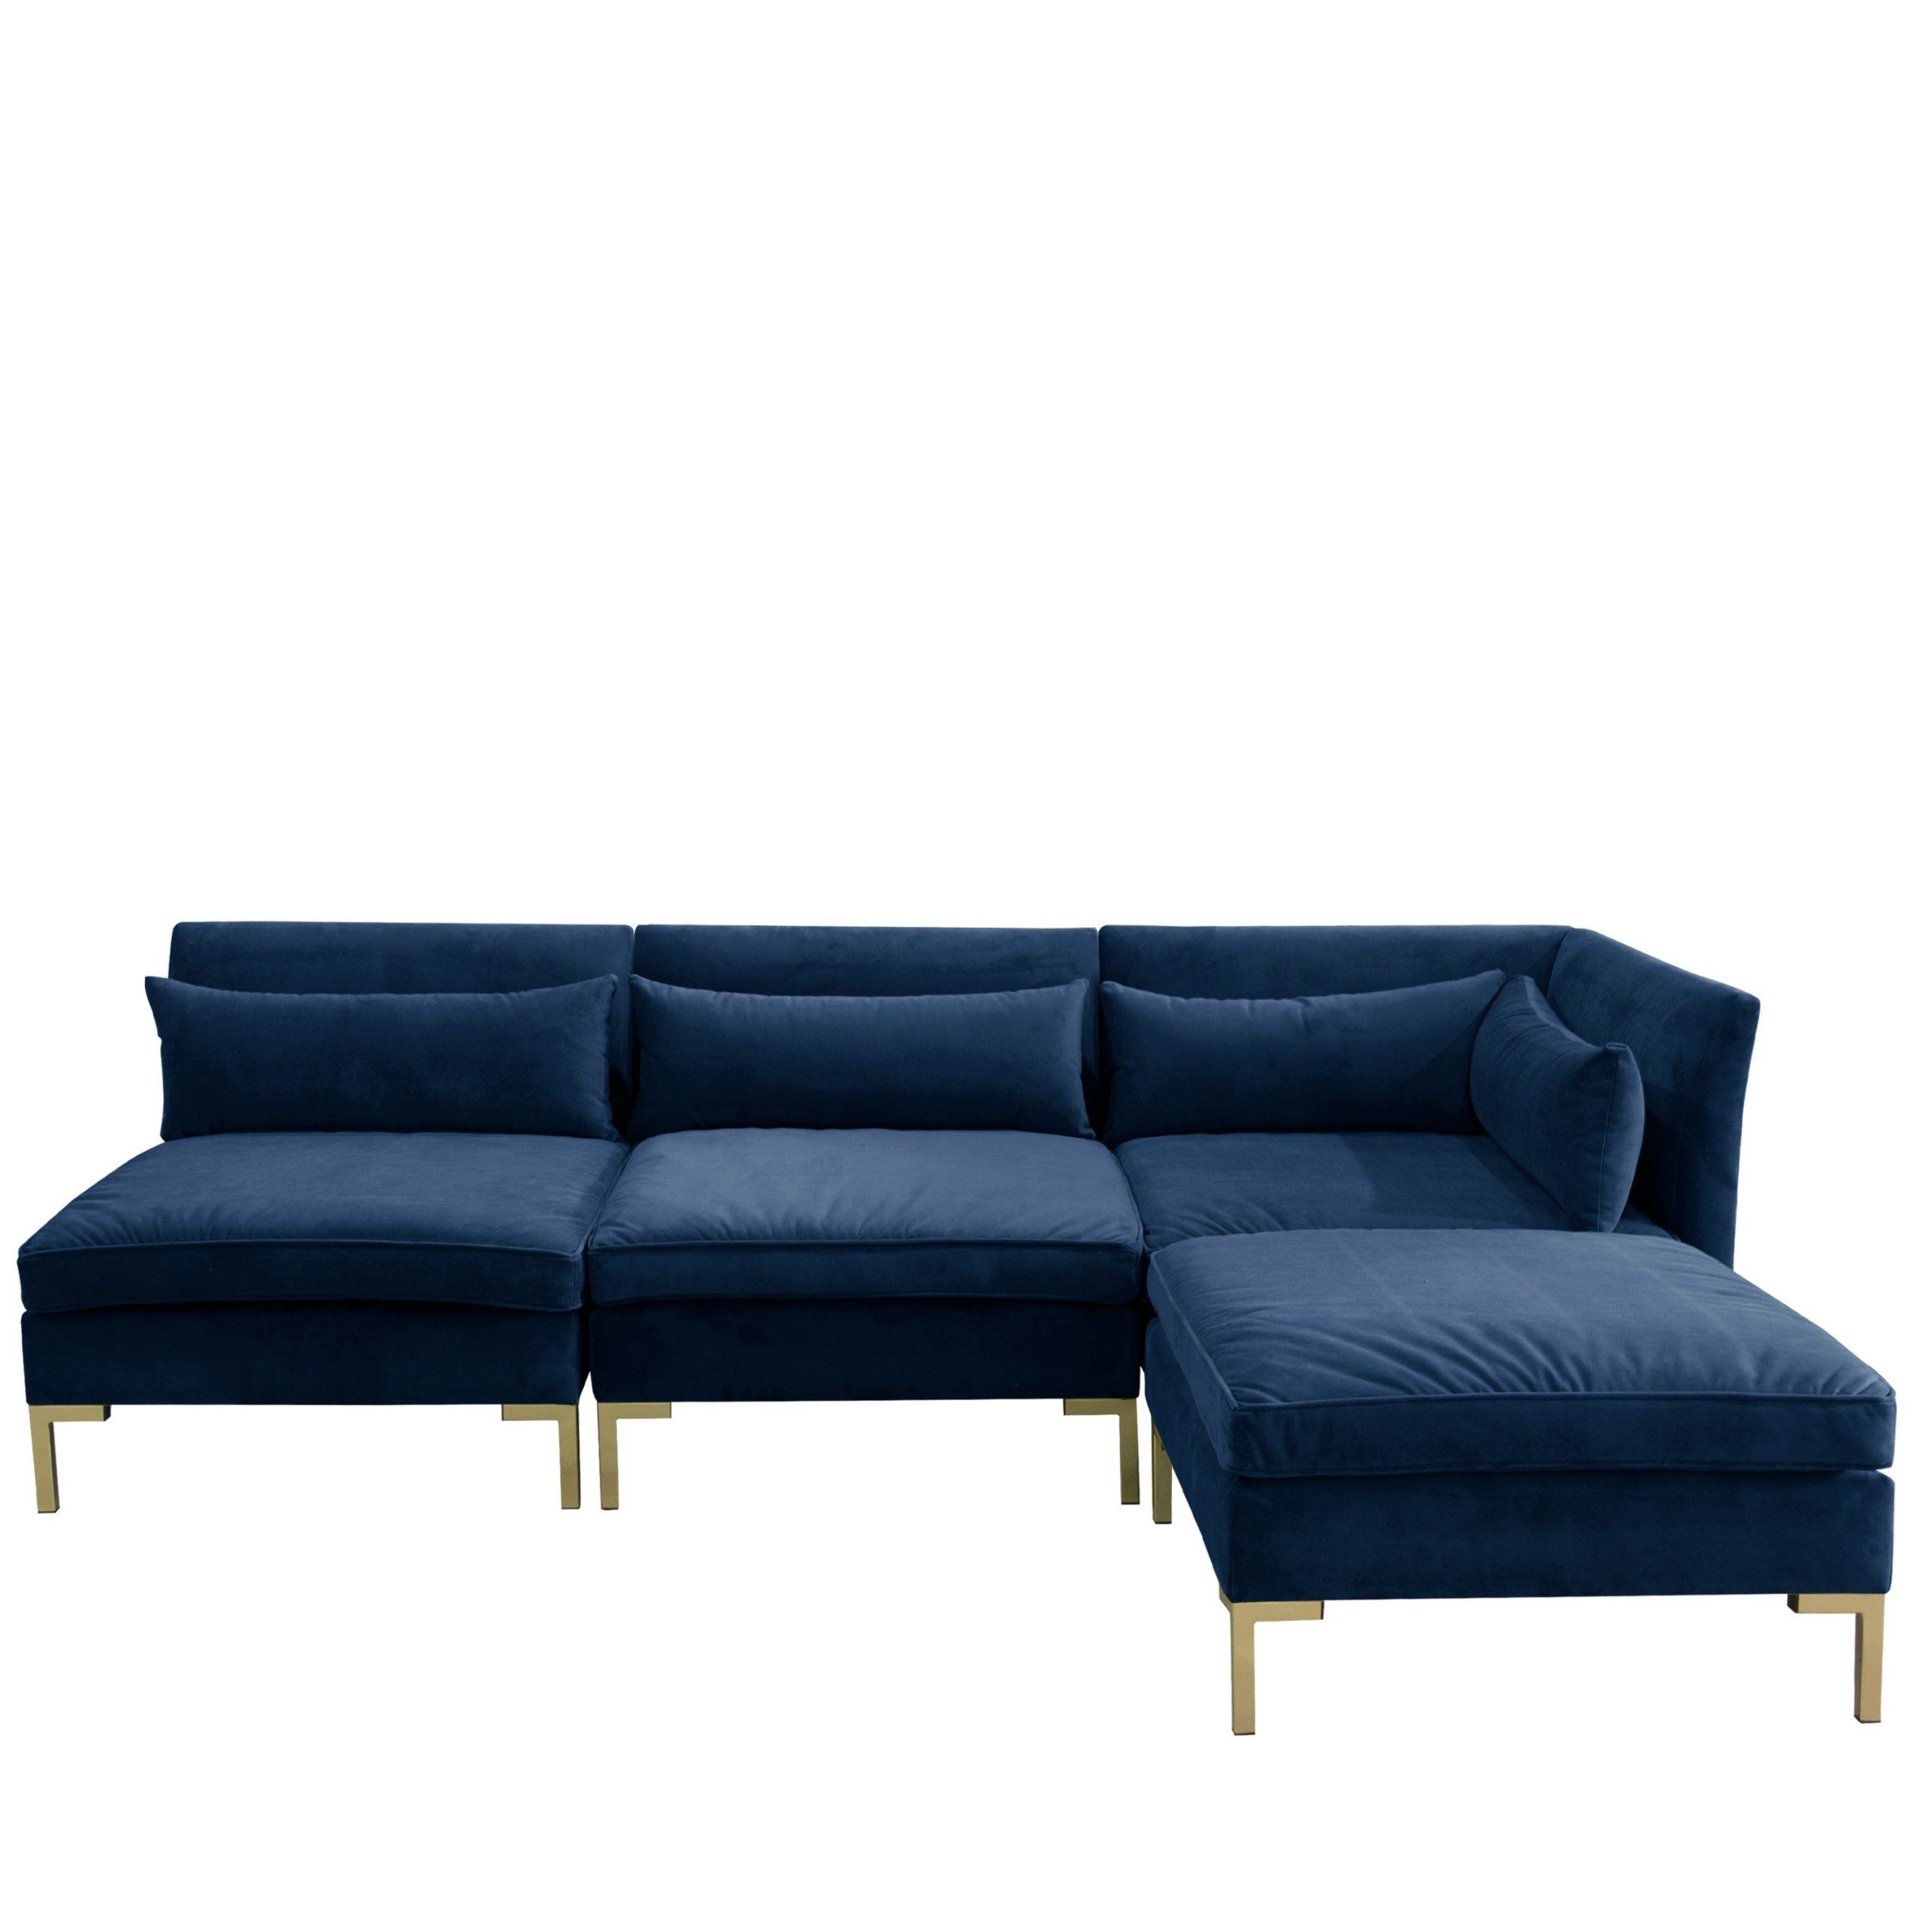 Alaina Velvet Sectional, Navy | Modular Sectional Sofa With Regard To 4Pc Alexis Sectional Sofas With Silver Metal Y Legs (View 10 of 15)